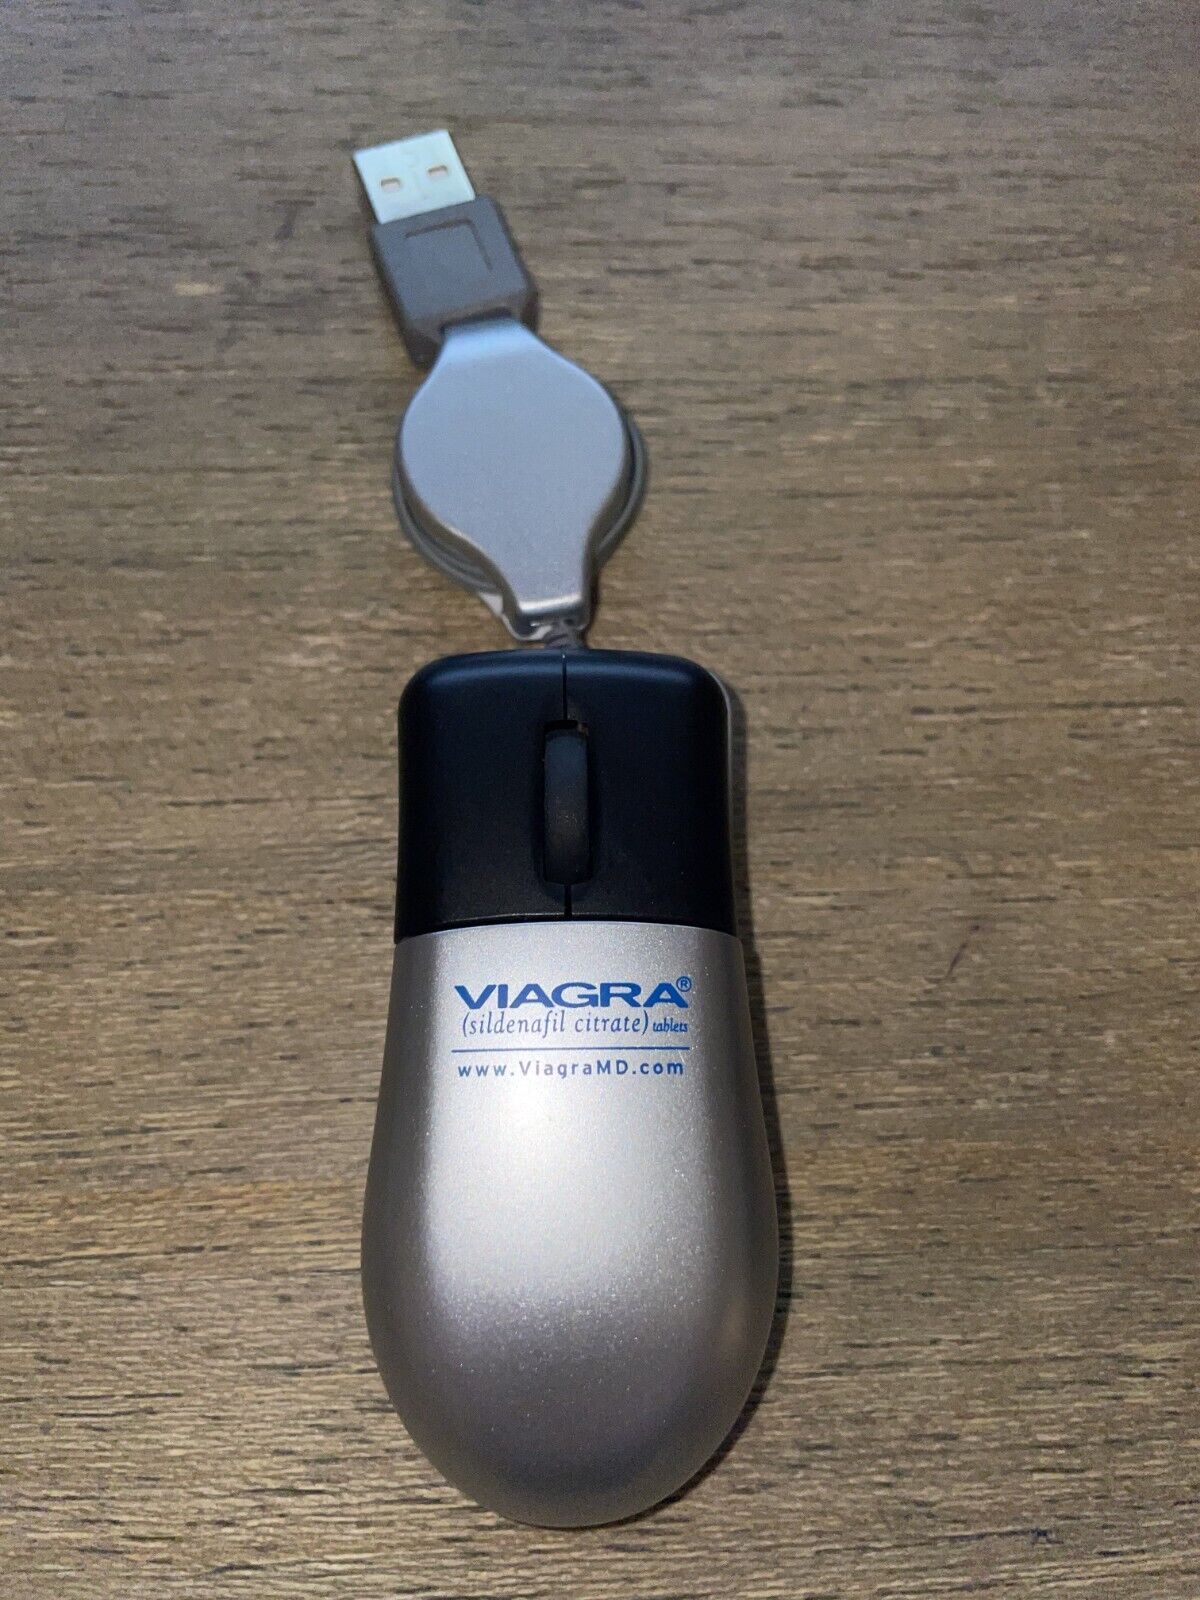 Viagra Mini Optical Mouse New Never Used - Gift Fun Laugh Cry Funny Gag Party